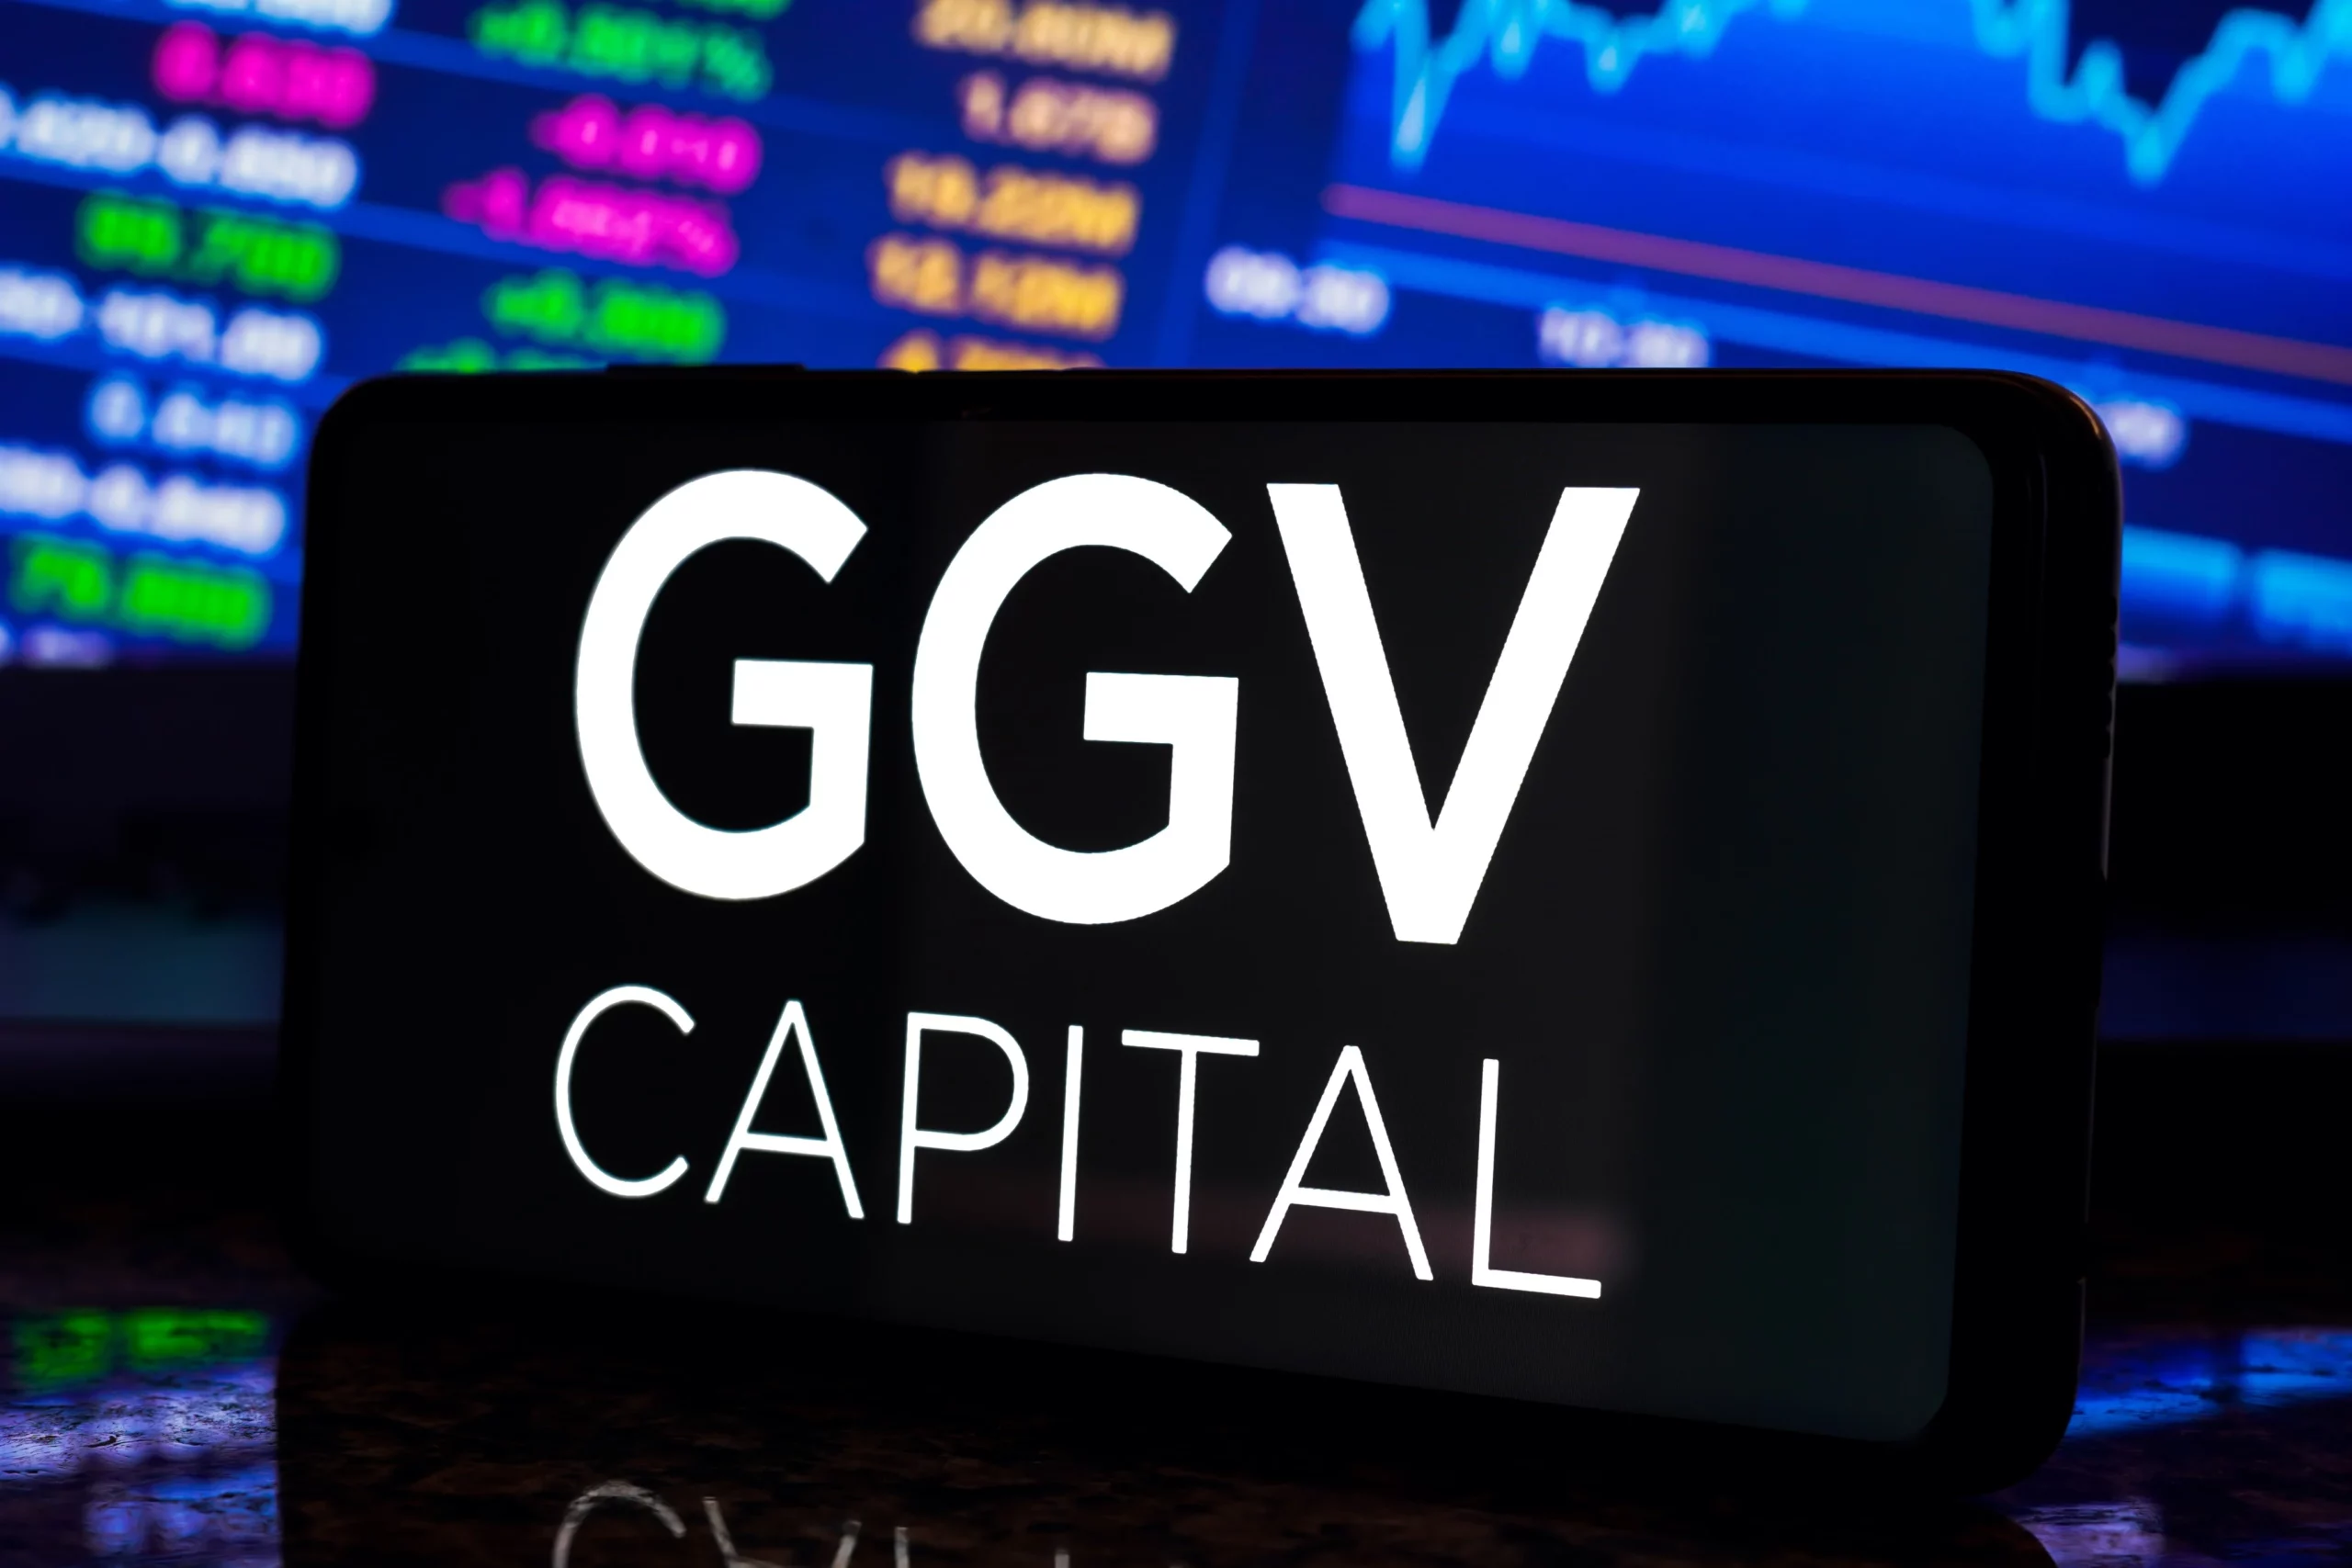 GGV Capital divides into Granite Asia and Notable Capital, heralding a new era.